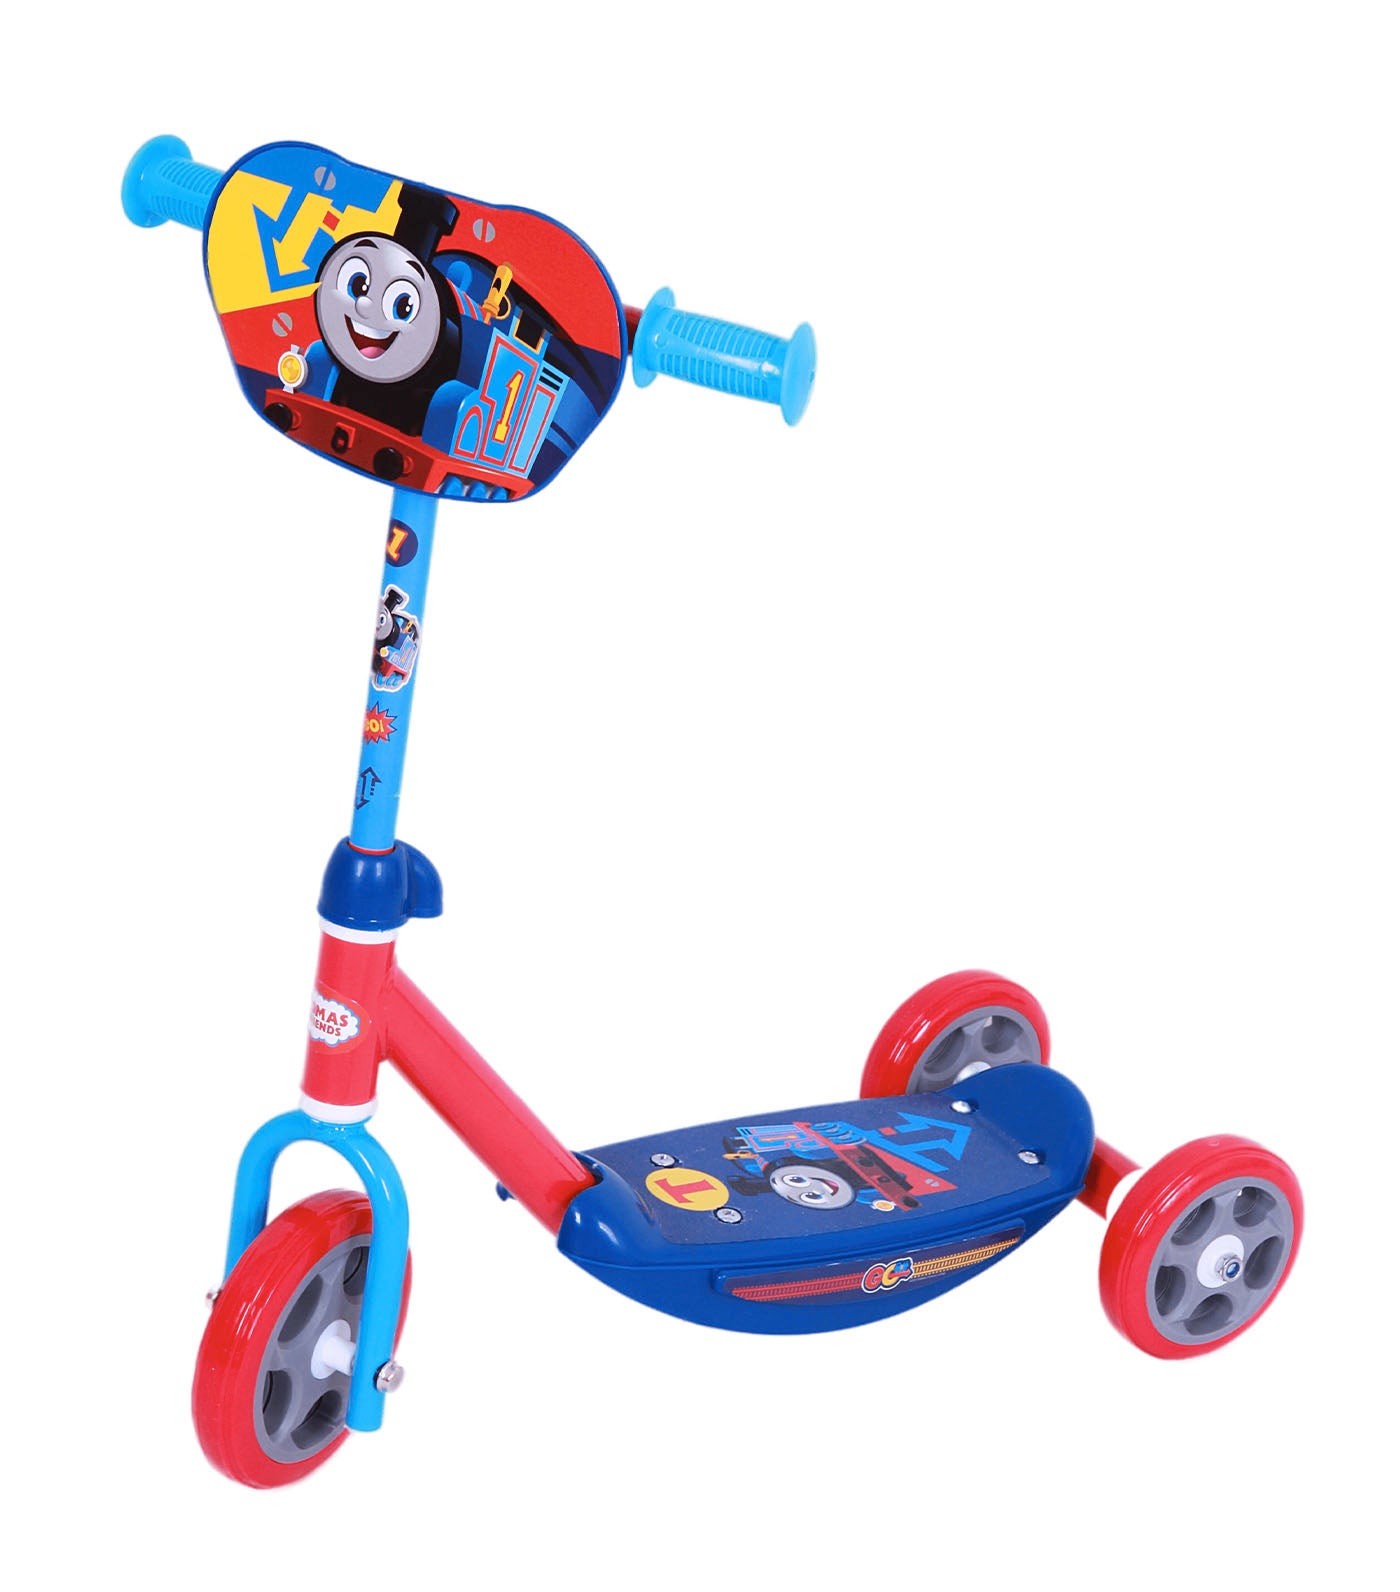 Thomas & Friends Tri-Scooter - Blue & Red